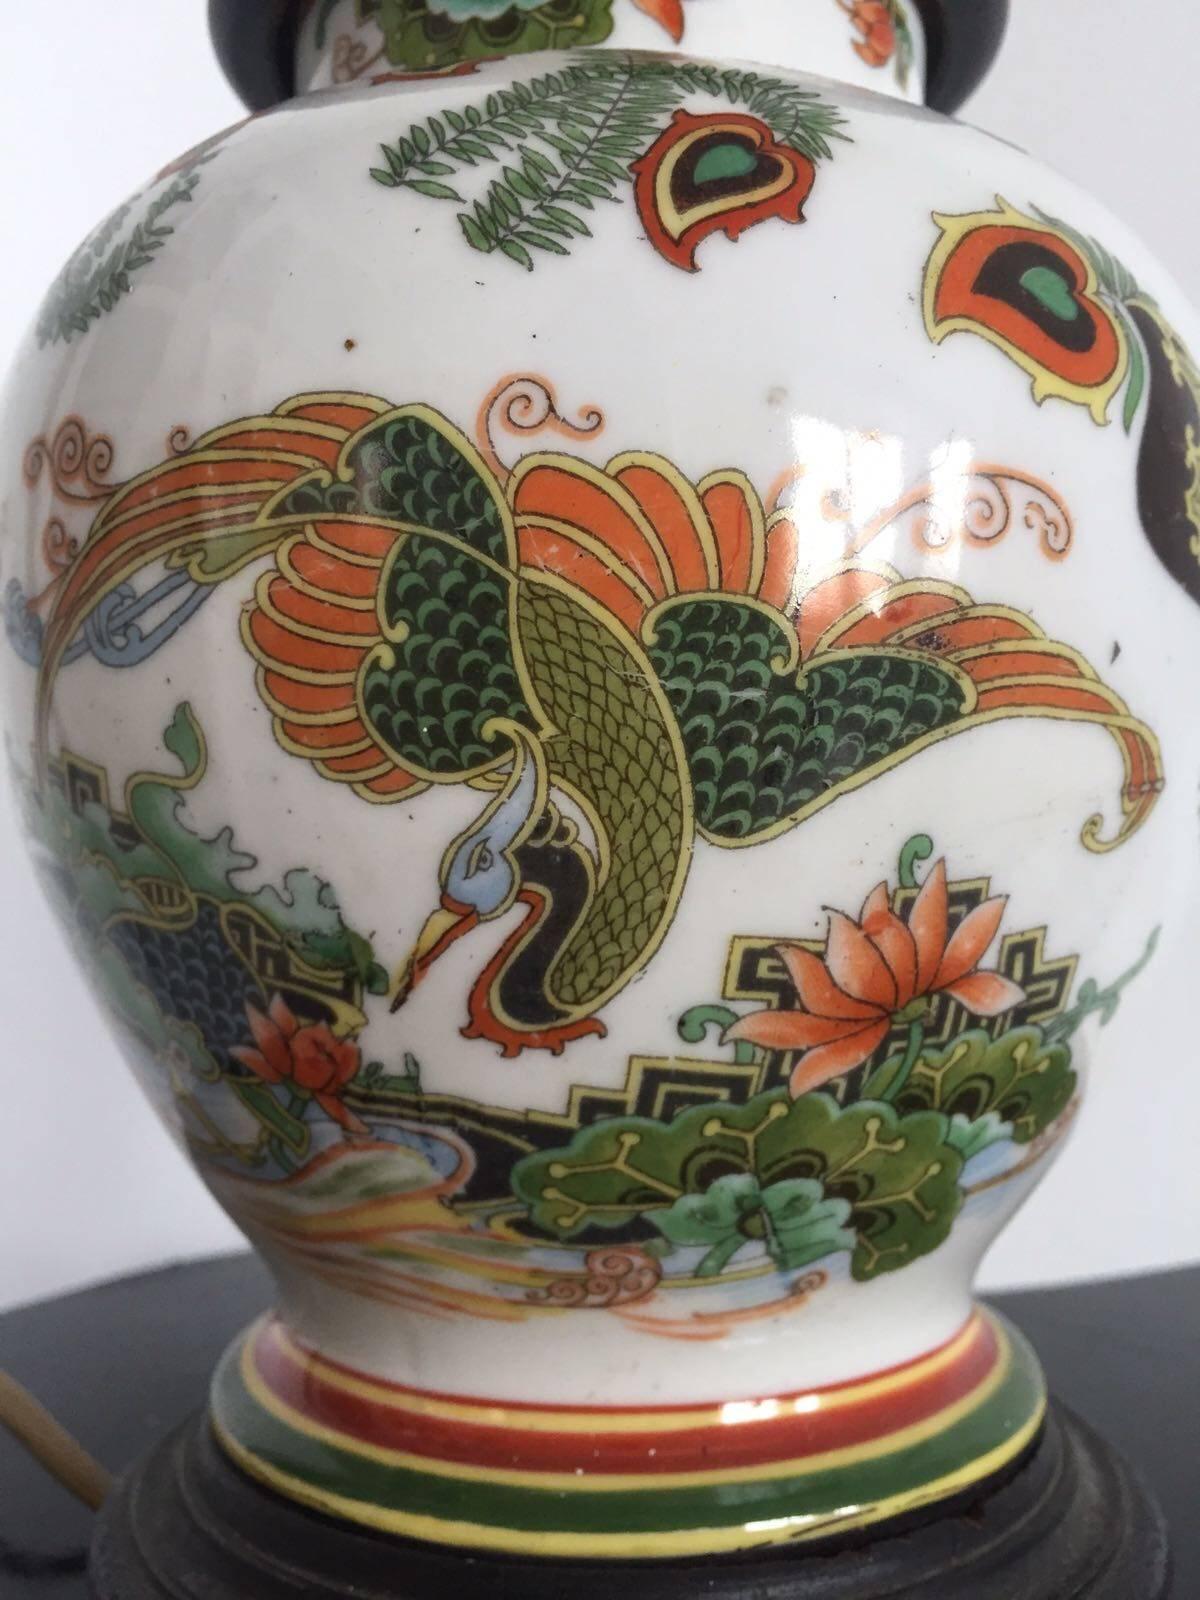 This ceramic vase table lamp with hand-painted Japanese decoration of exotic bird, was made during the Showa period, circa 1930s .
Finished with dark wood top and base.

Dimensions: H 28 cm x Diameter 16 cm.
Condition: Good condition, normal